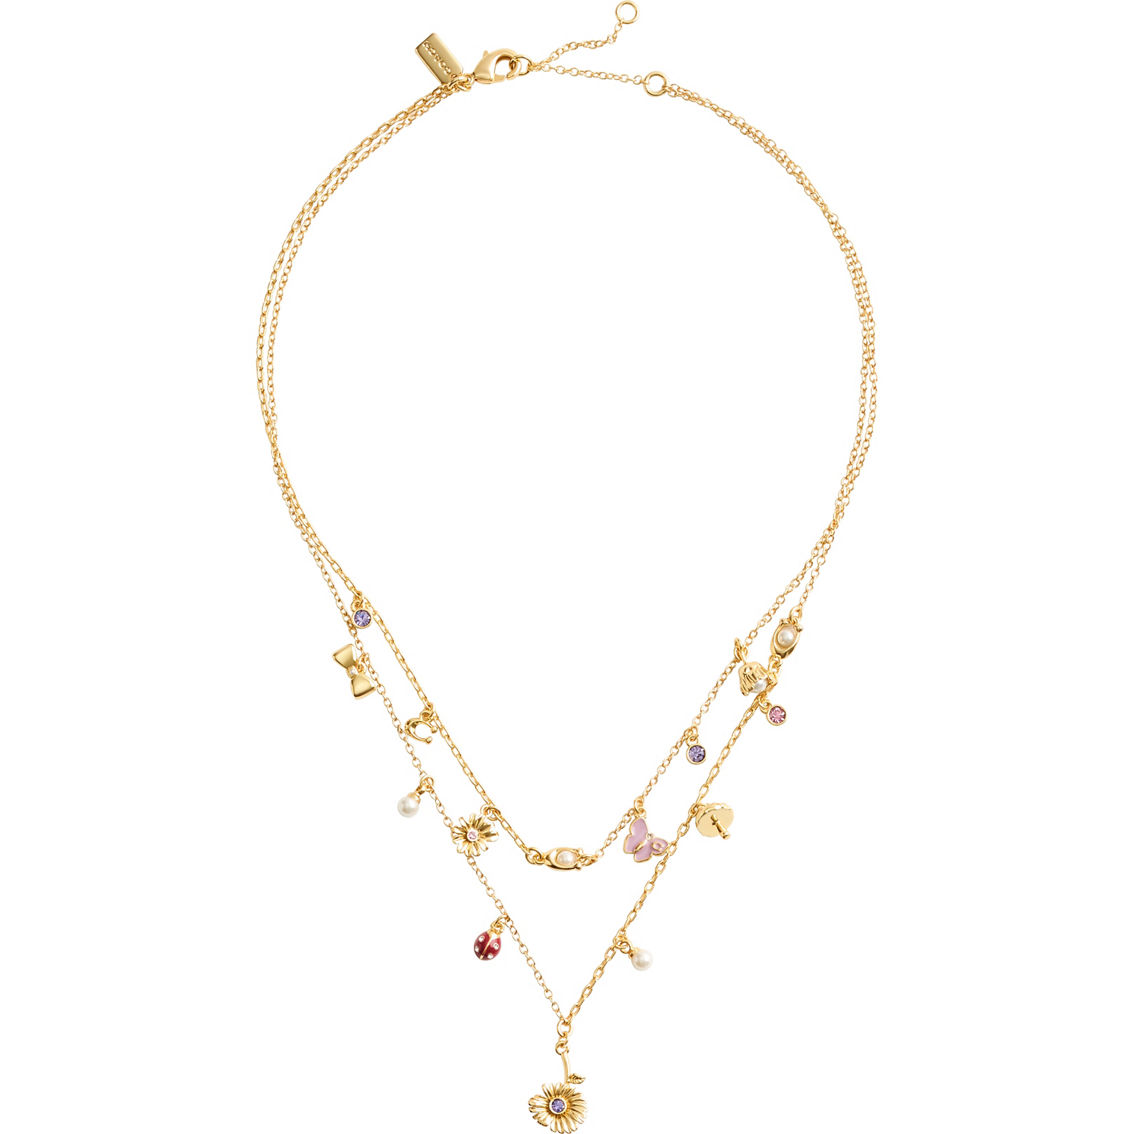 Coach Multi Signature Mixed Charm Layered Necklace 15-17 in. - Image 2 of 3